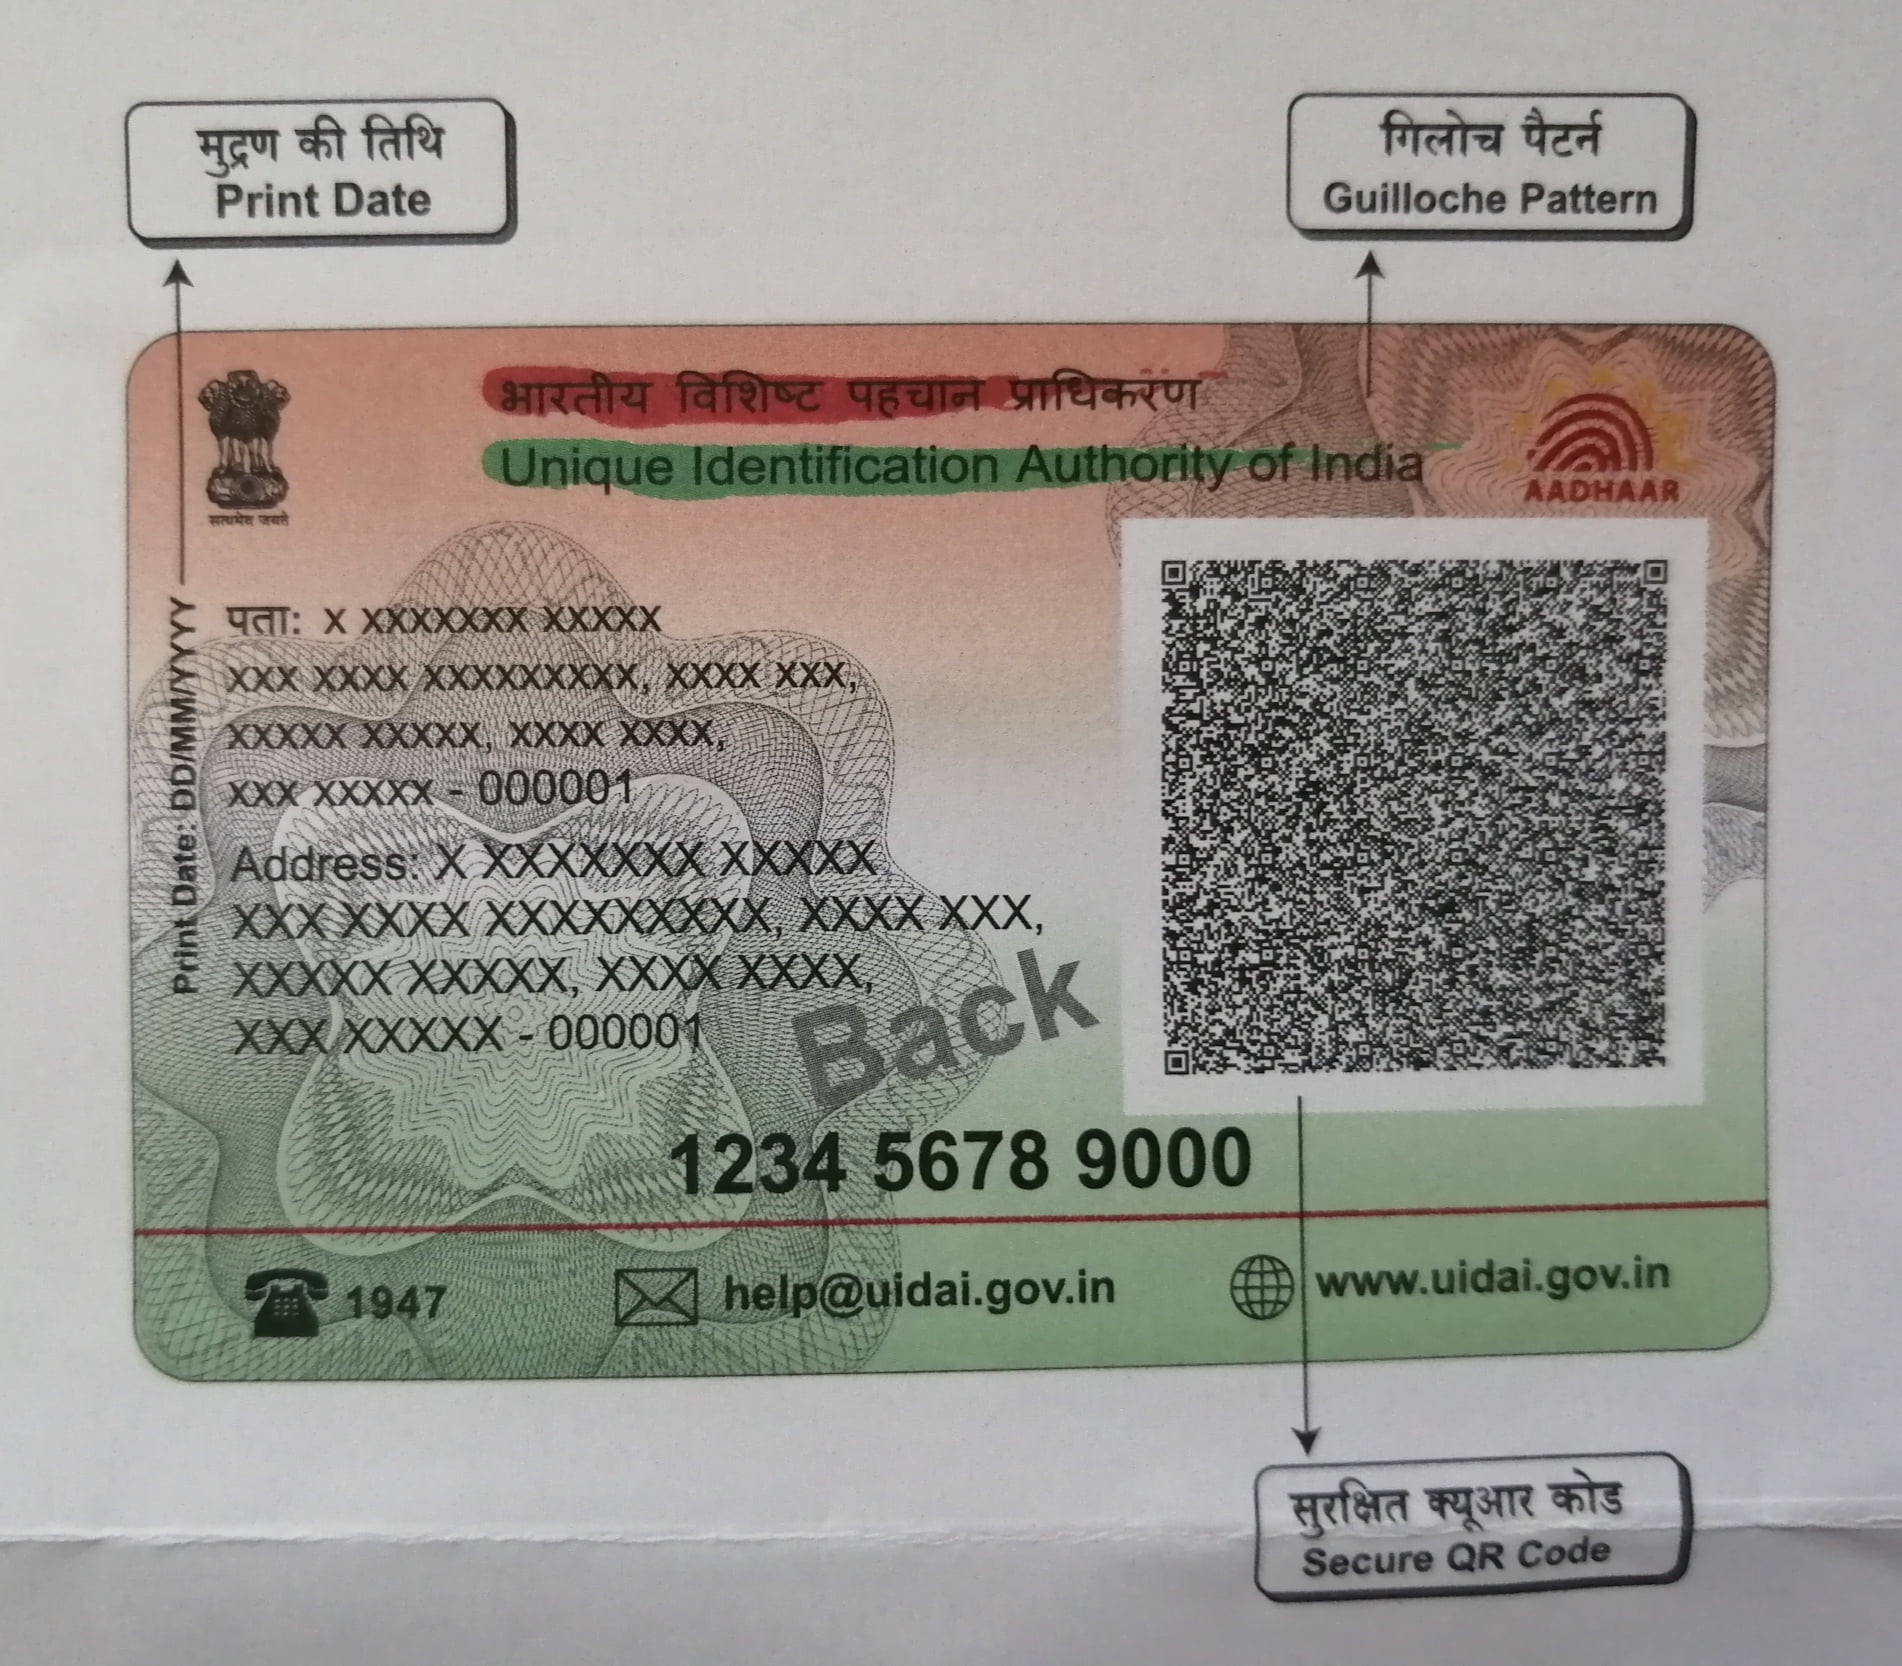 You have this Aadhaar card that is useless now